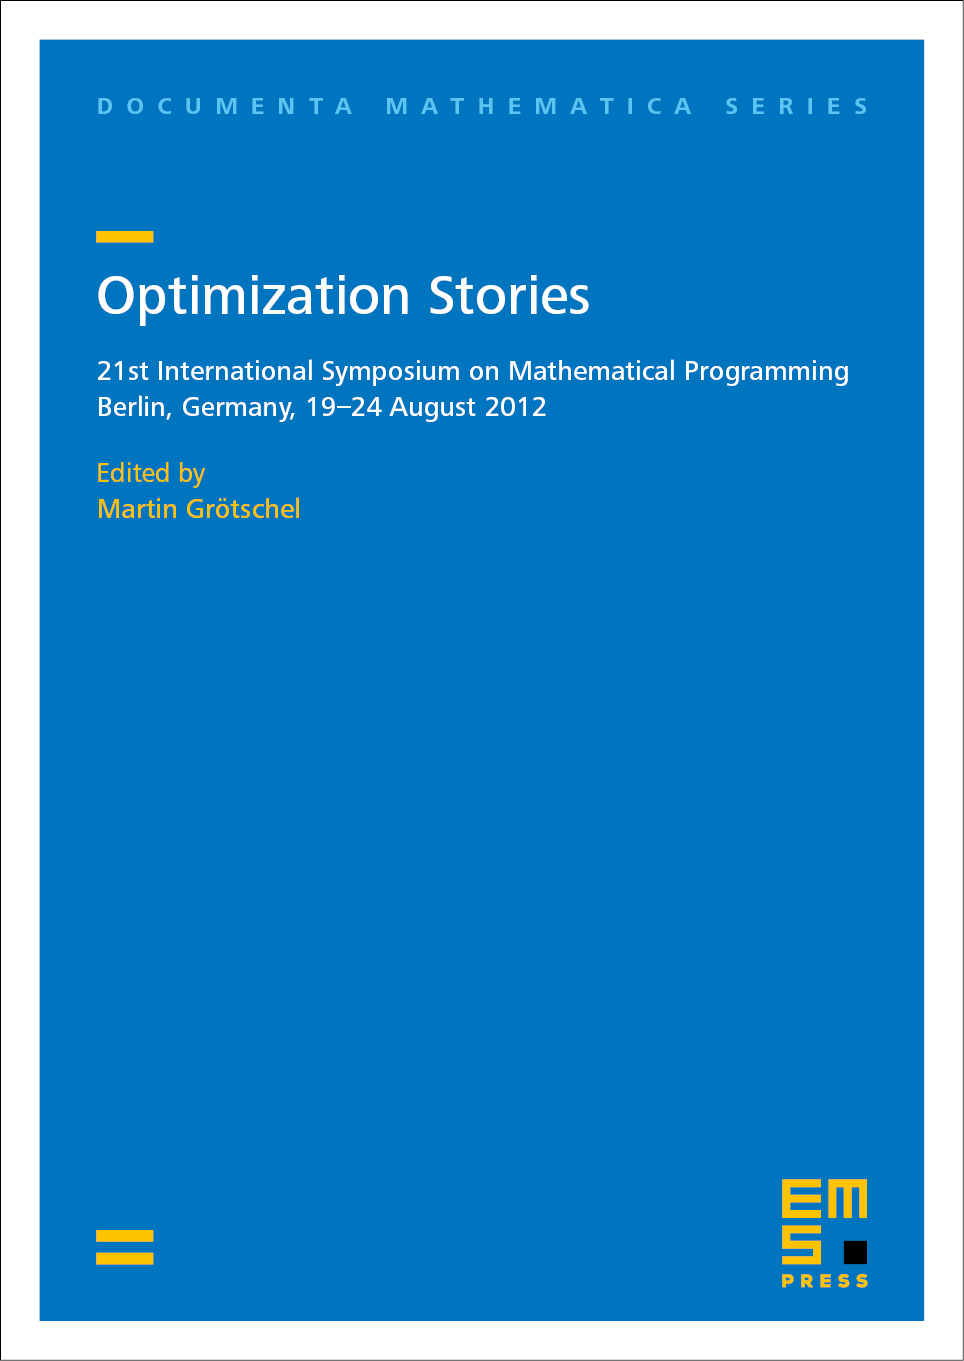 On the evolution of optimization modeling systems cover